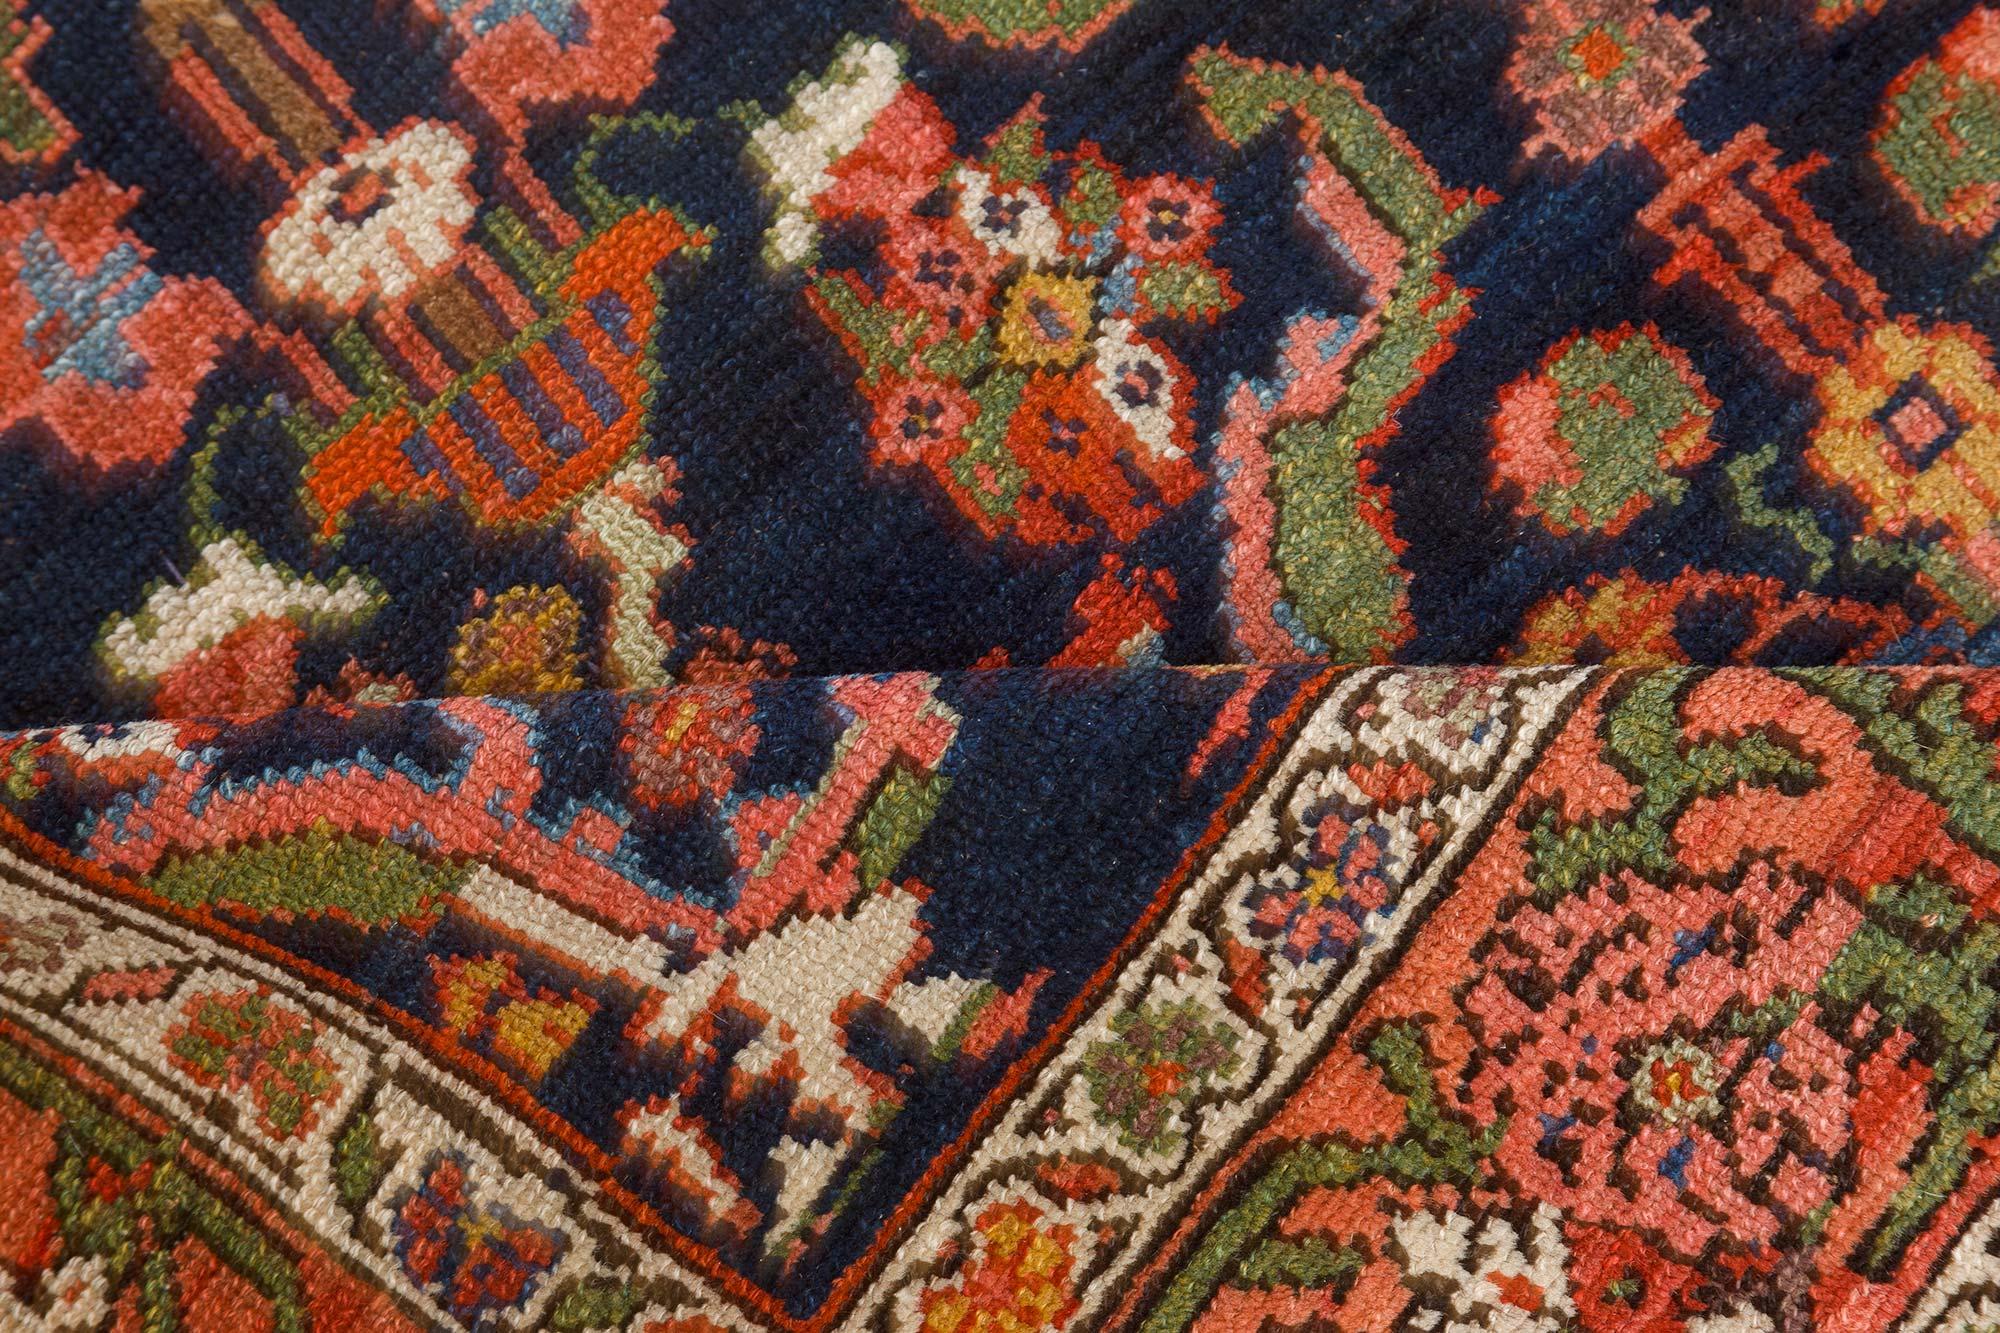 Authentic 19th Century North West Persian Handmade Wool Carpet
Size: 5'8